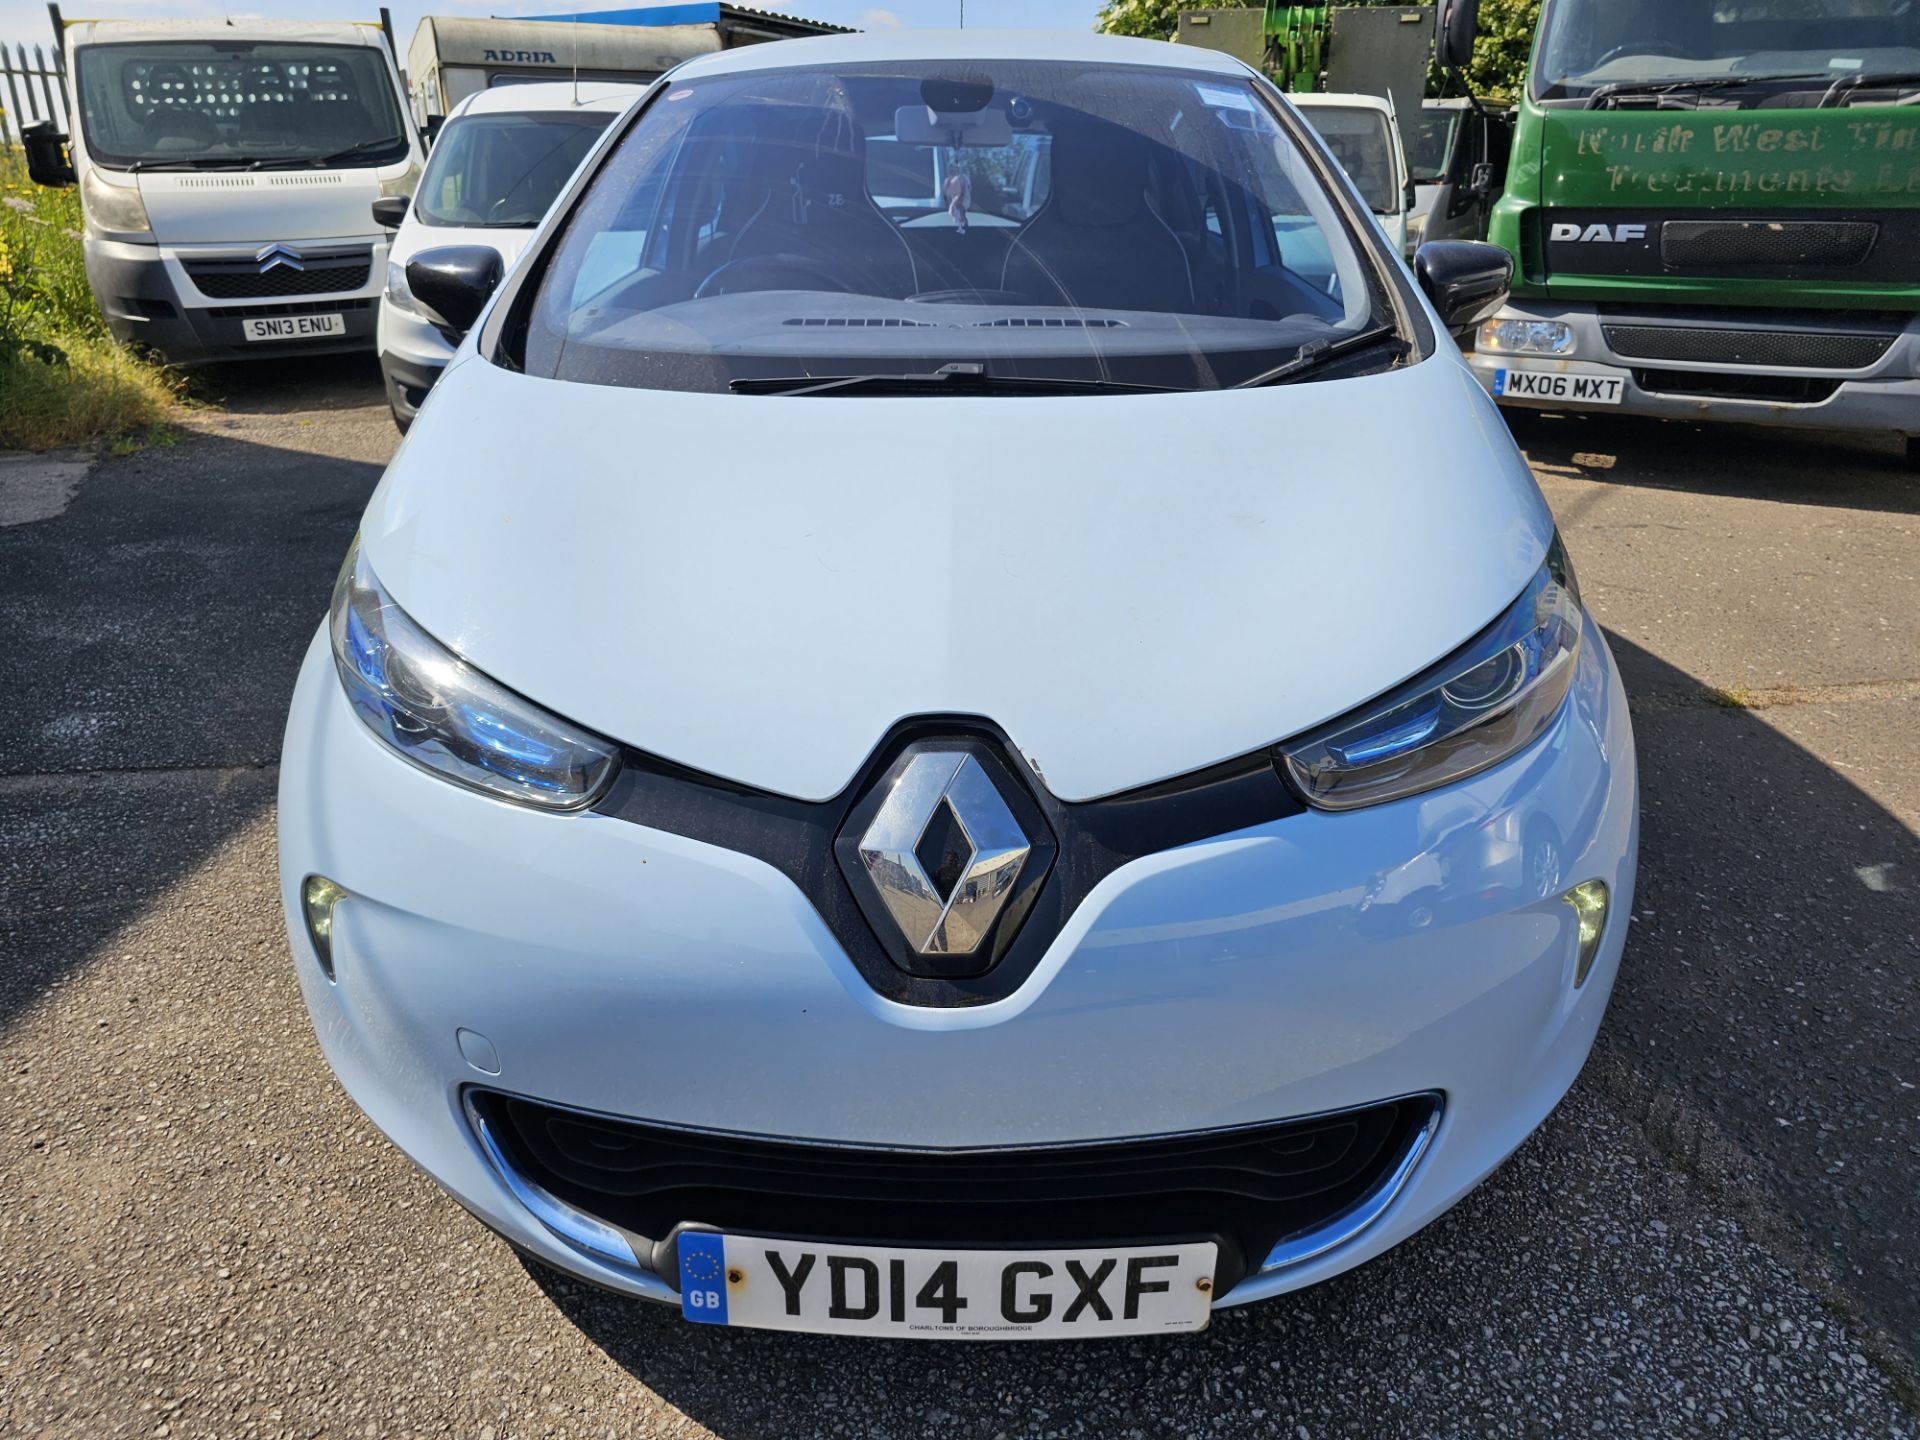 2014/14 REG RENAULT ZOE DYNAMIQUE INTENSE AUTOMATIC ELECTRIC HATCHBACK, SHOWING 1 FORMER KEEPER - Image 3 of 26